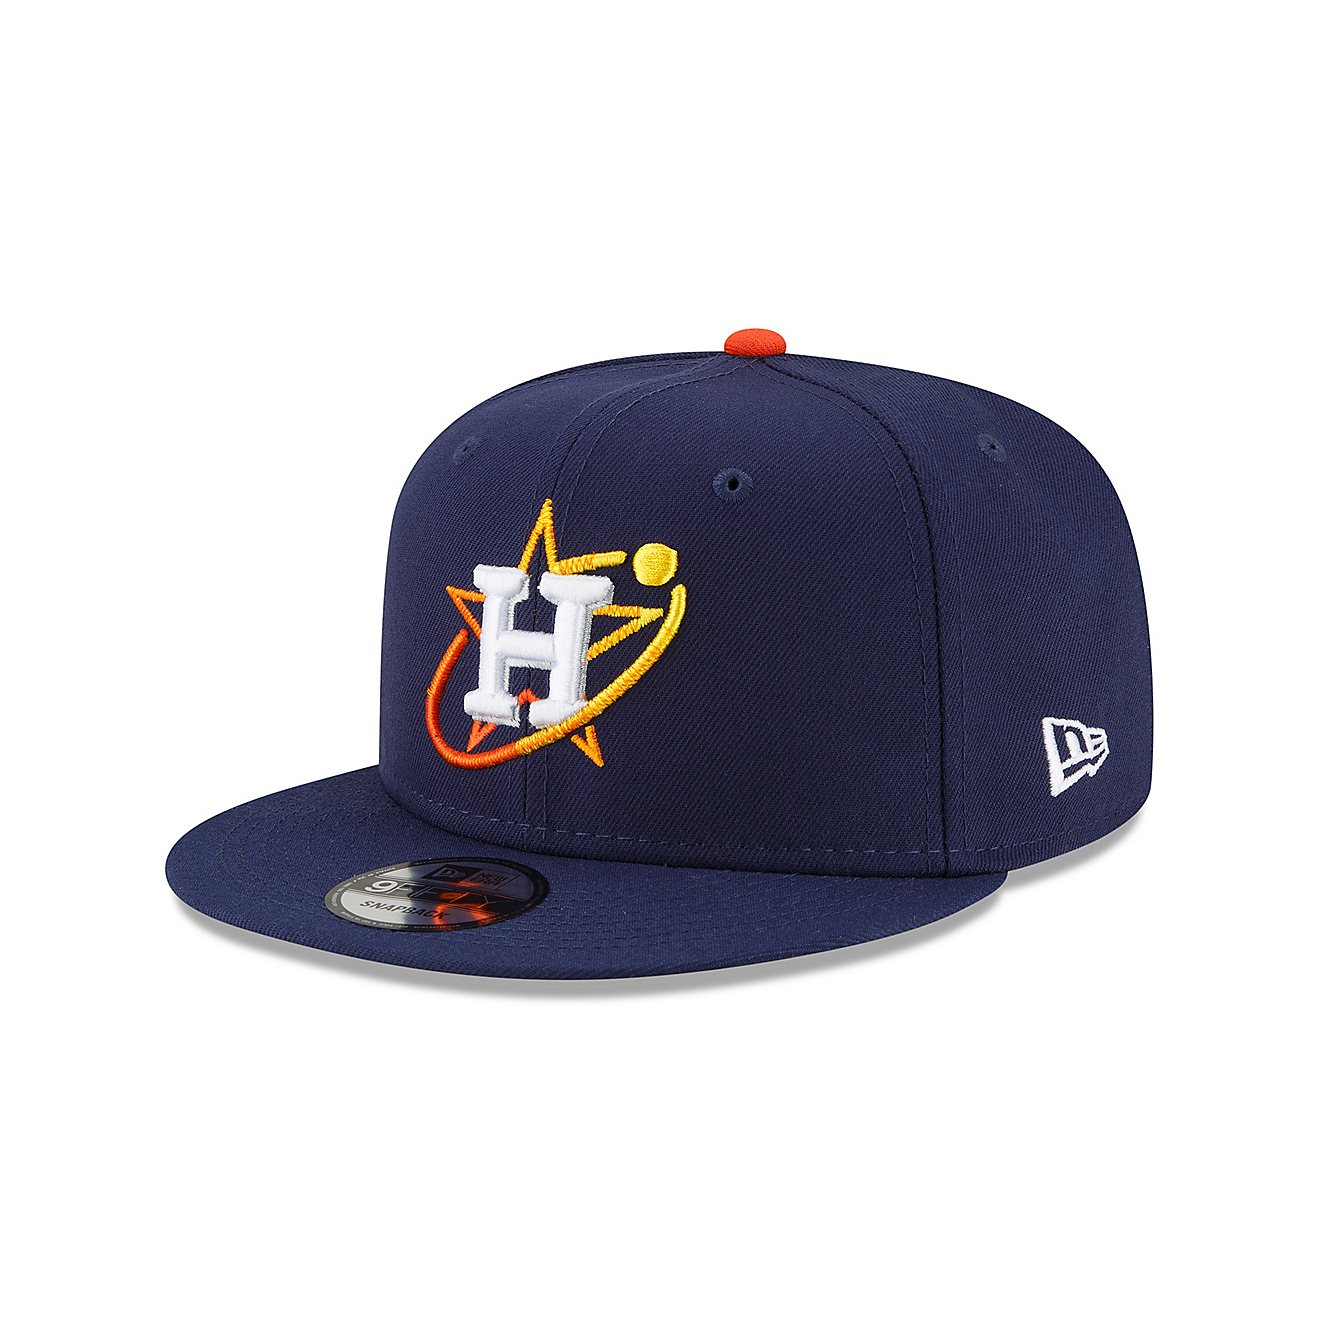 New Era Youth Houston Astros City Connect 9FIFTY Cap                                                                             - view number 1